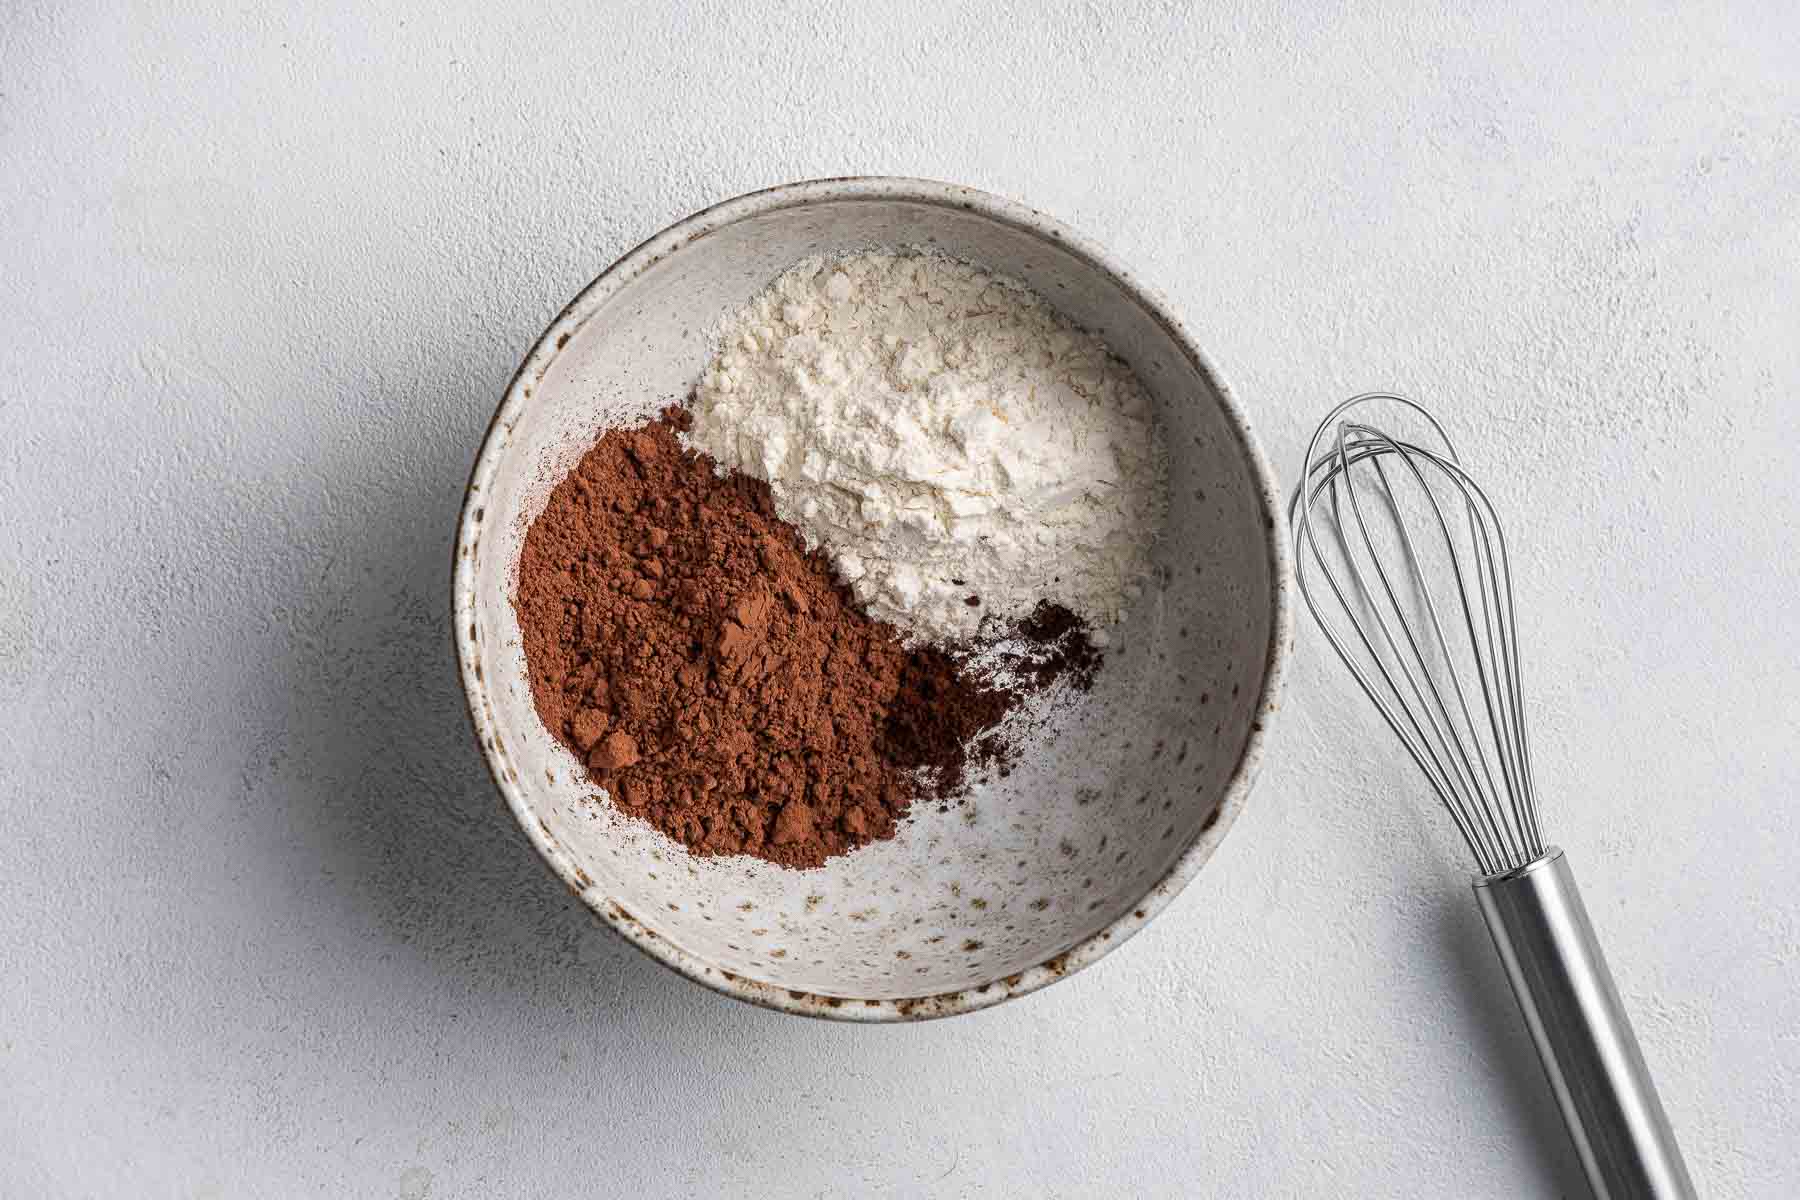 Whisking flour and cocoa powder together in a small bowl.